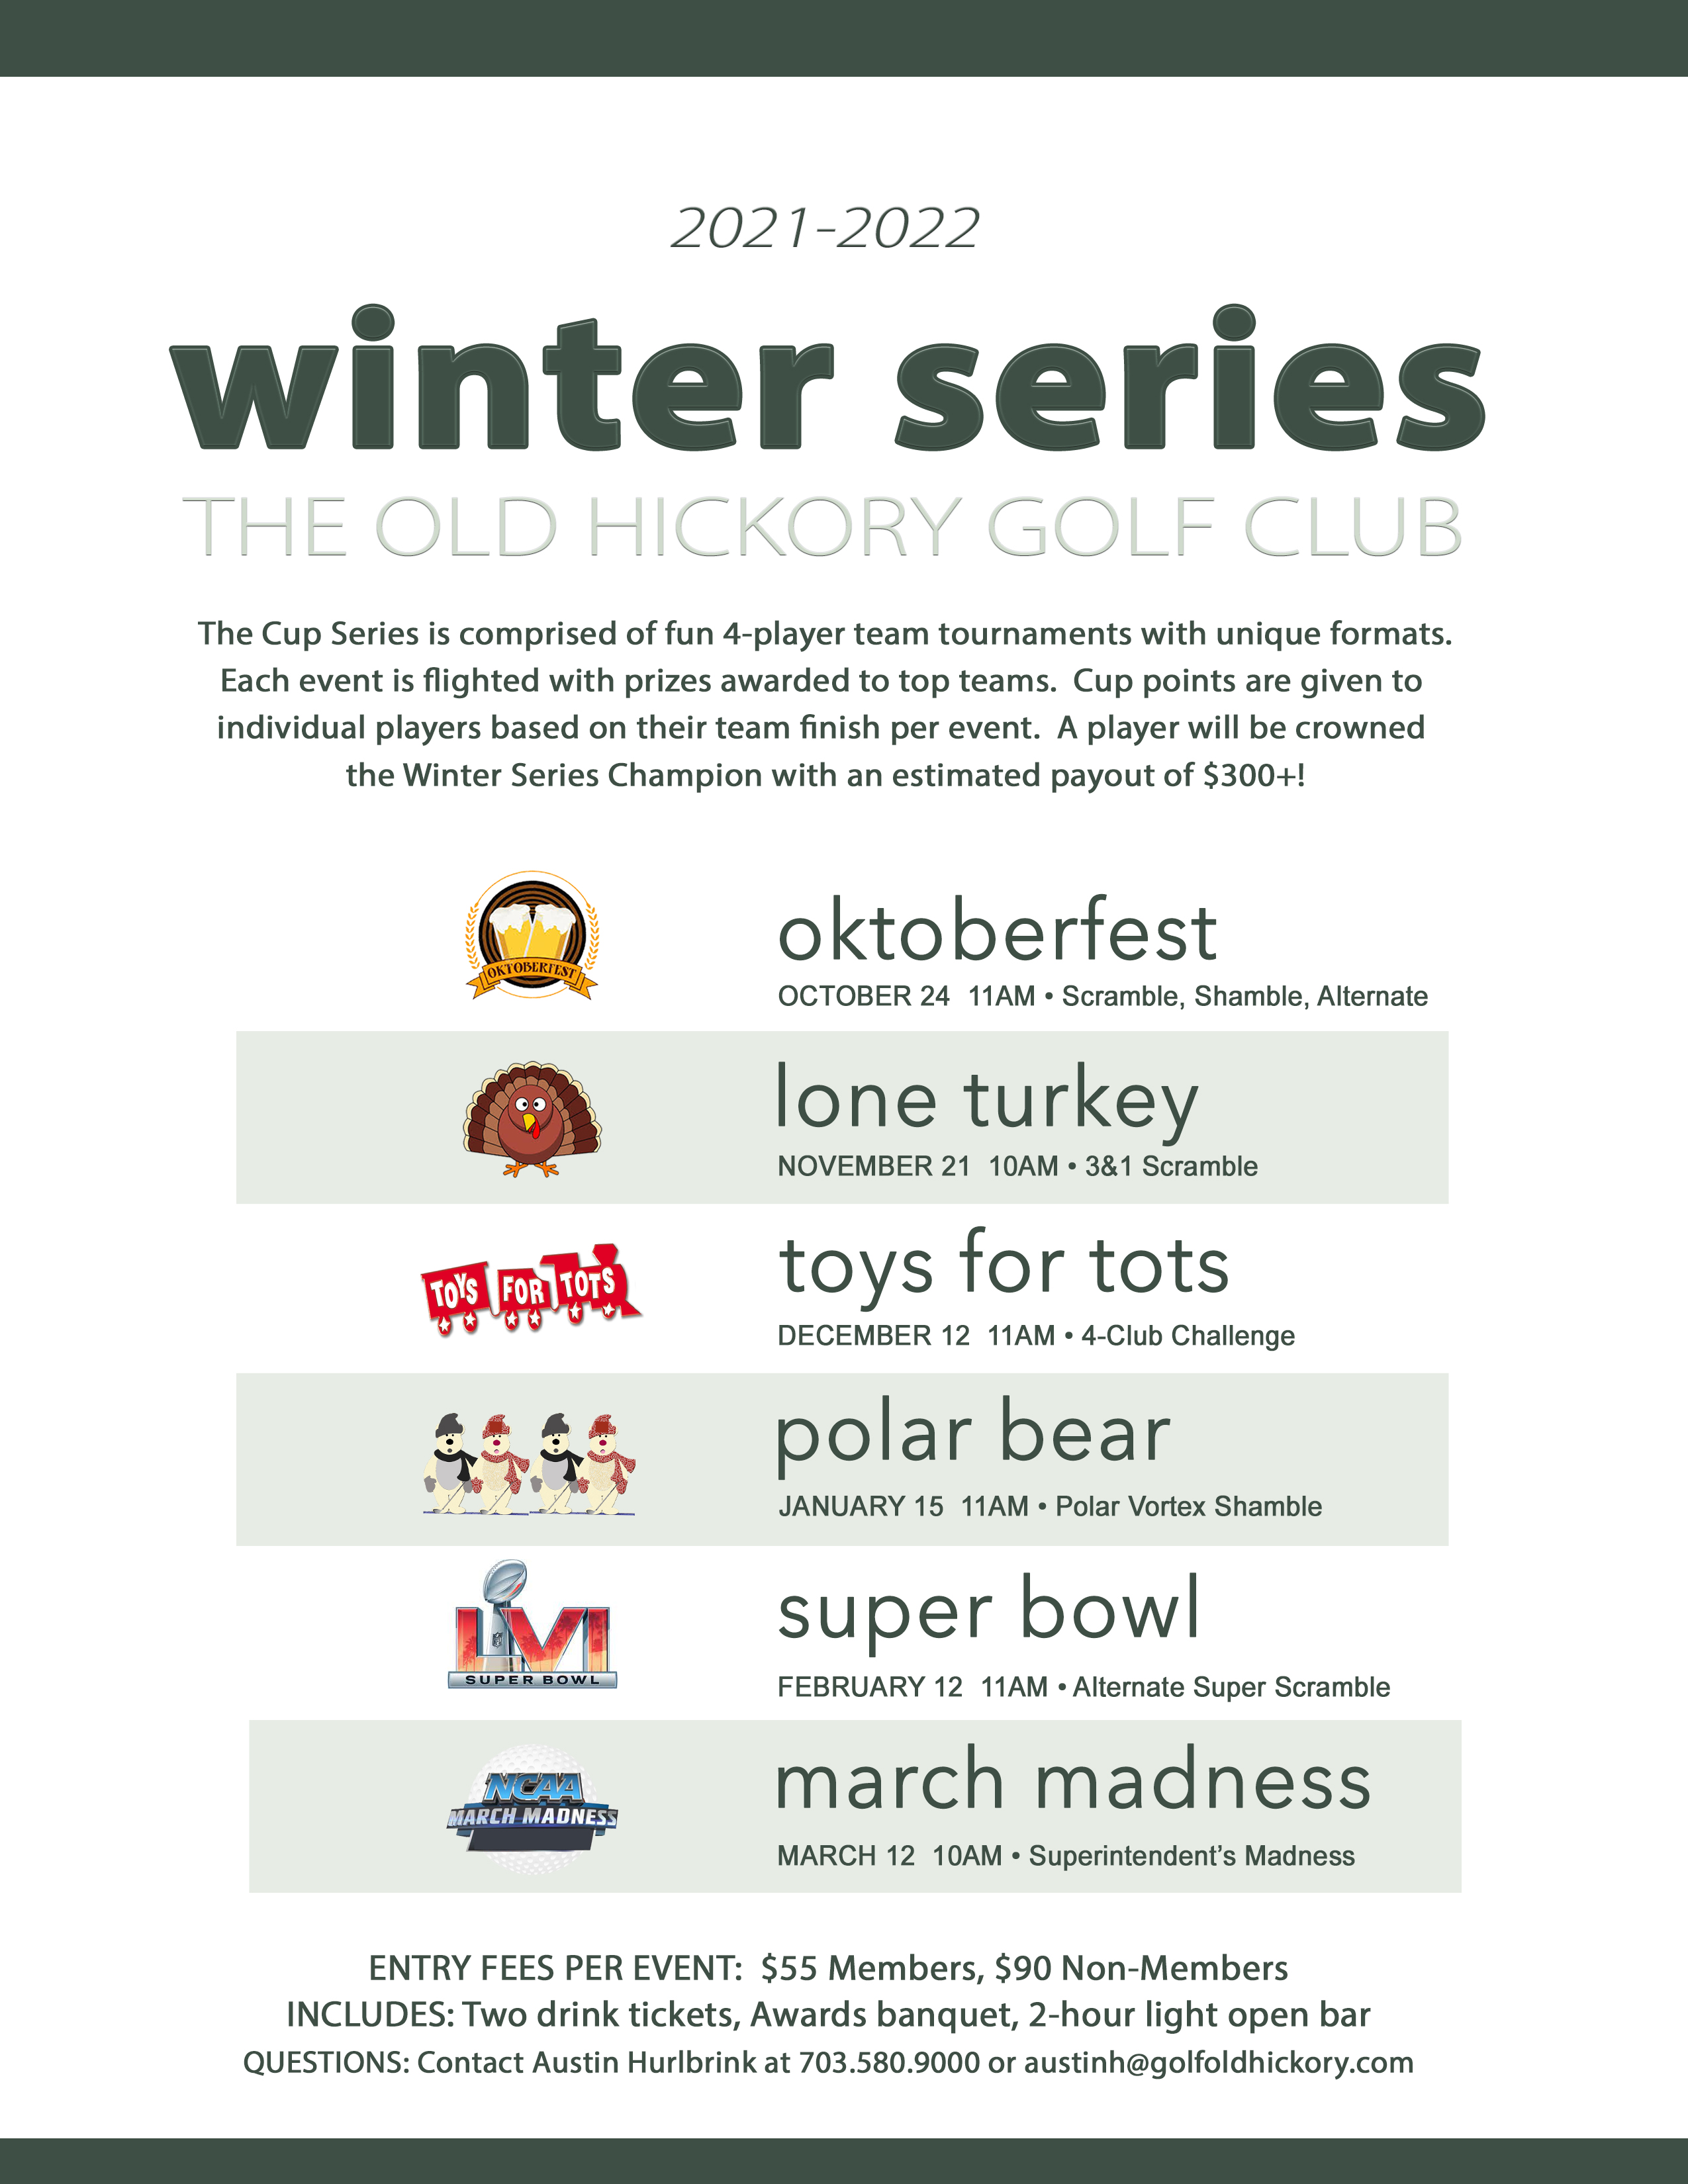 OH Winter series 21 22 flyer